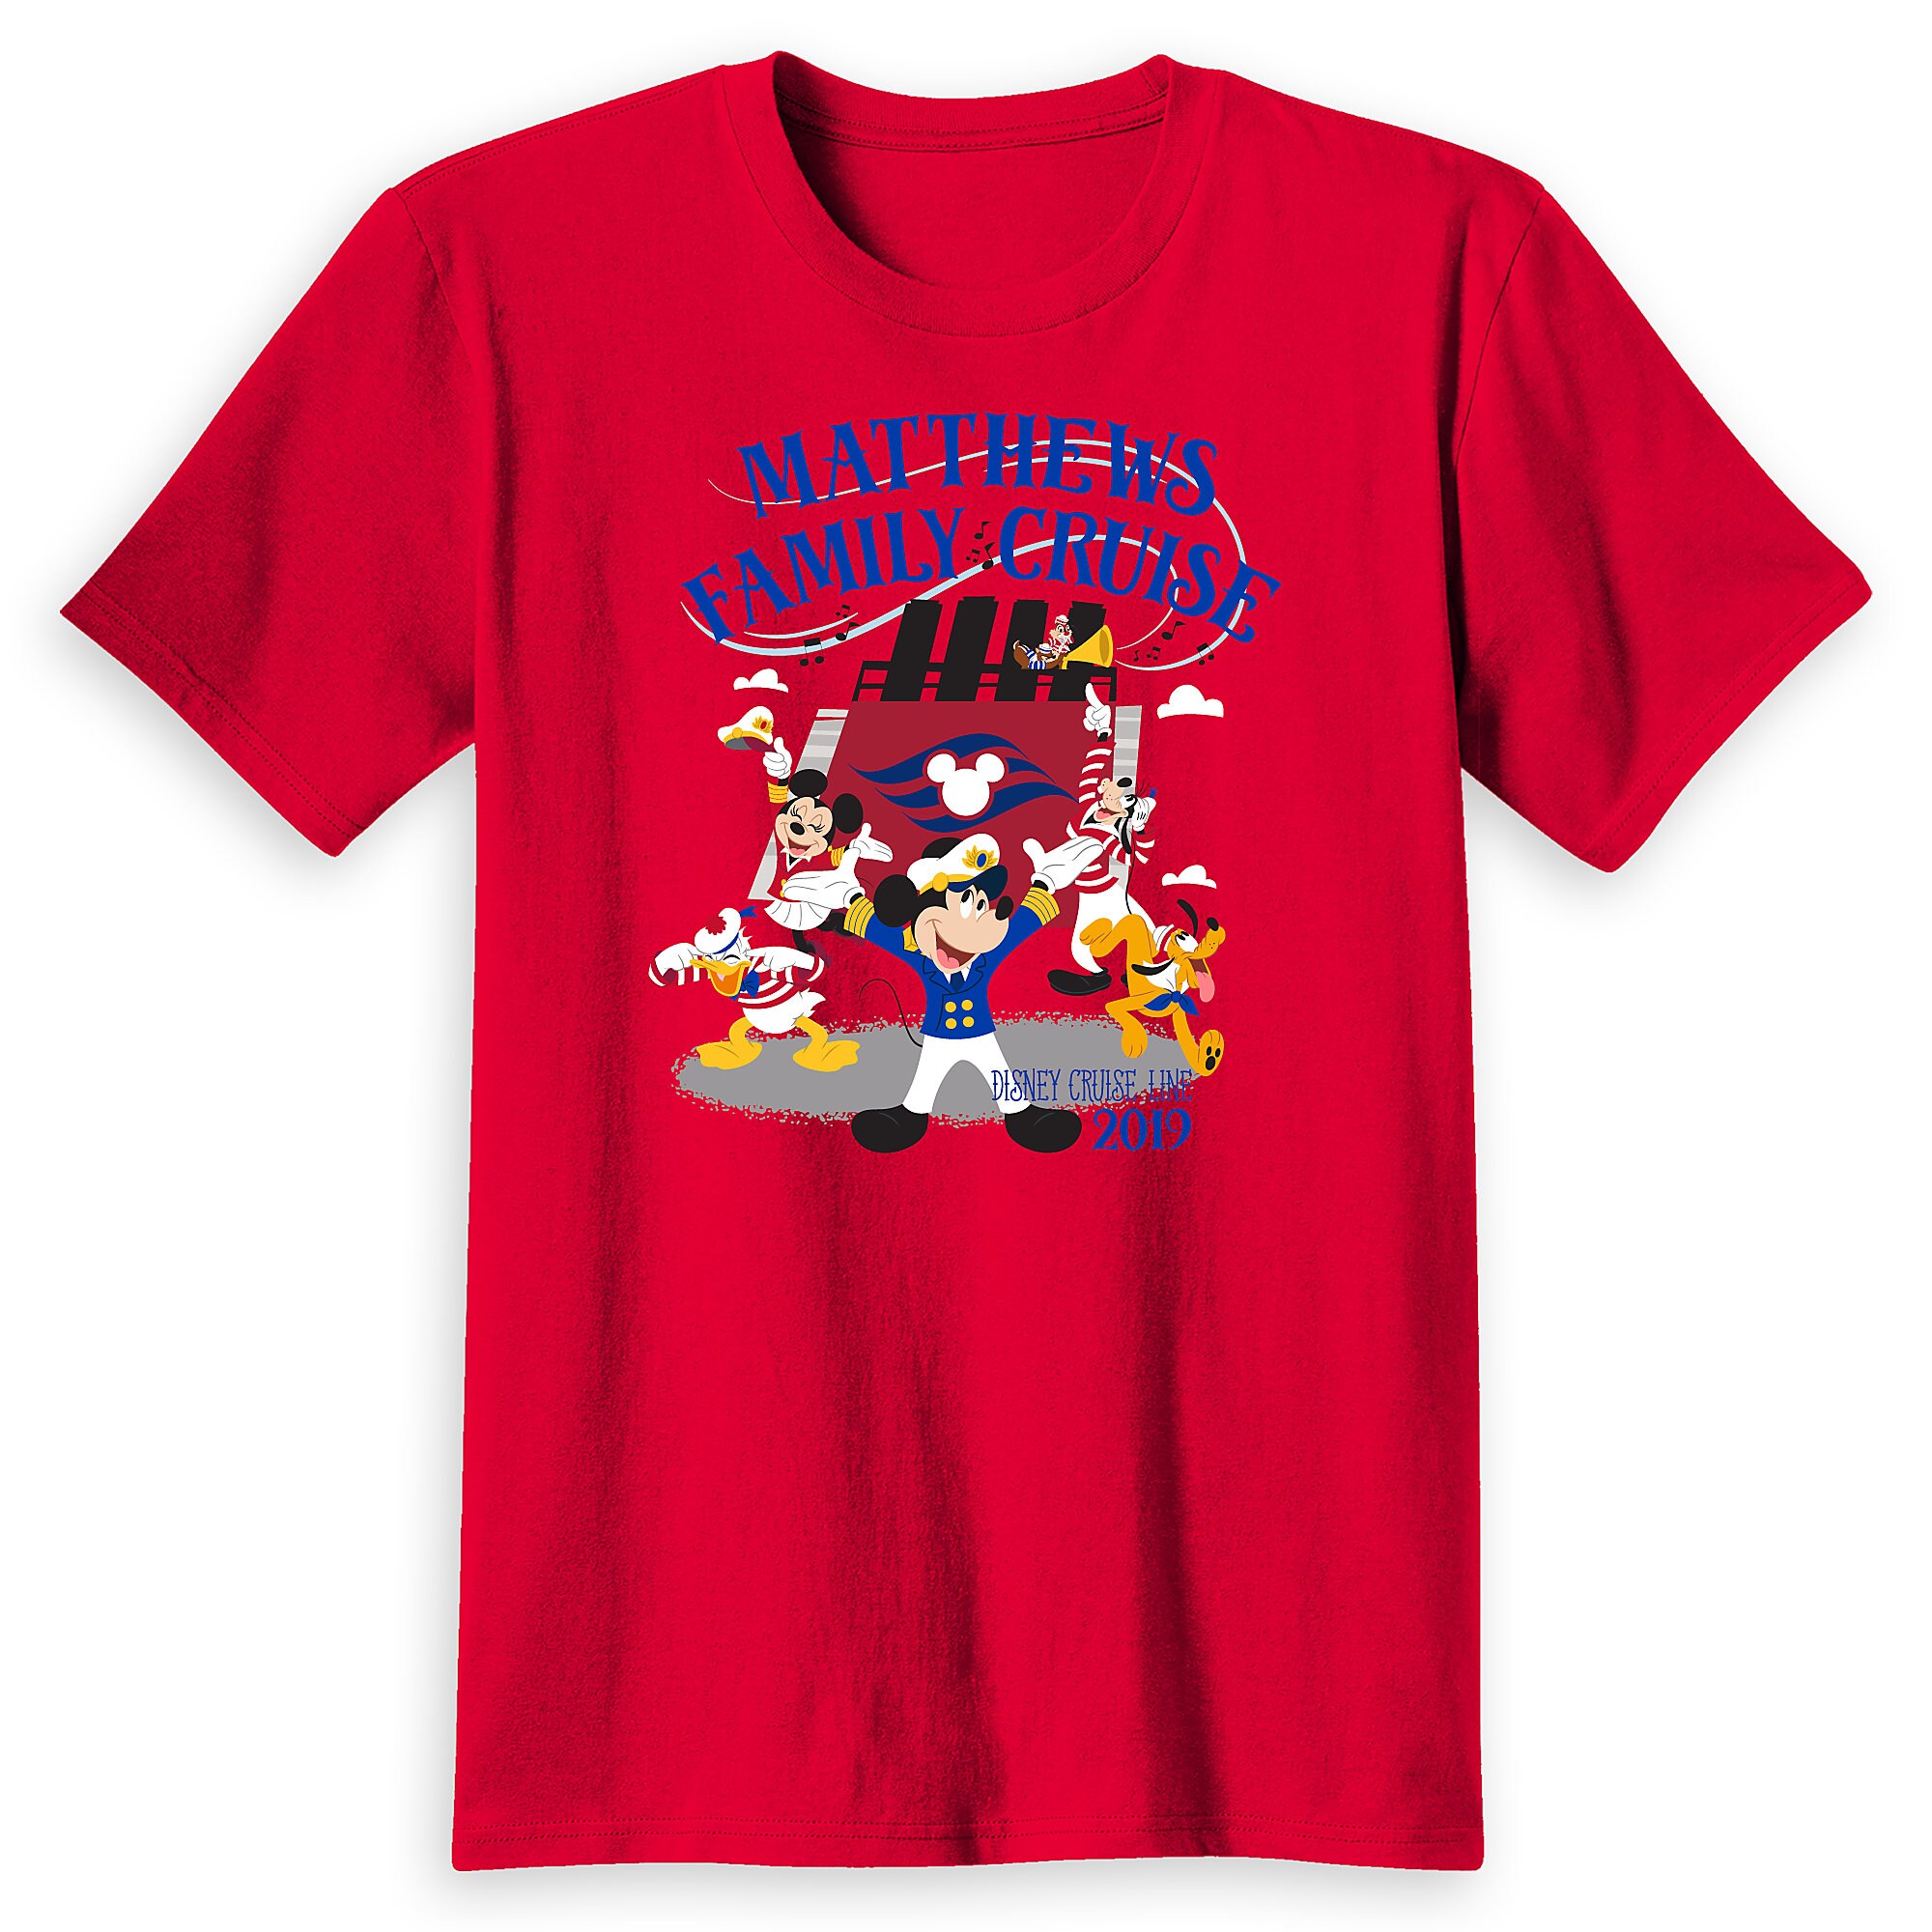 Adults' Captain Mickey Mouse and Crew Disney Cruise Line Family Cruise 2019 T-Shirt - Customized